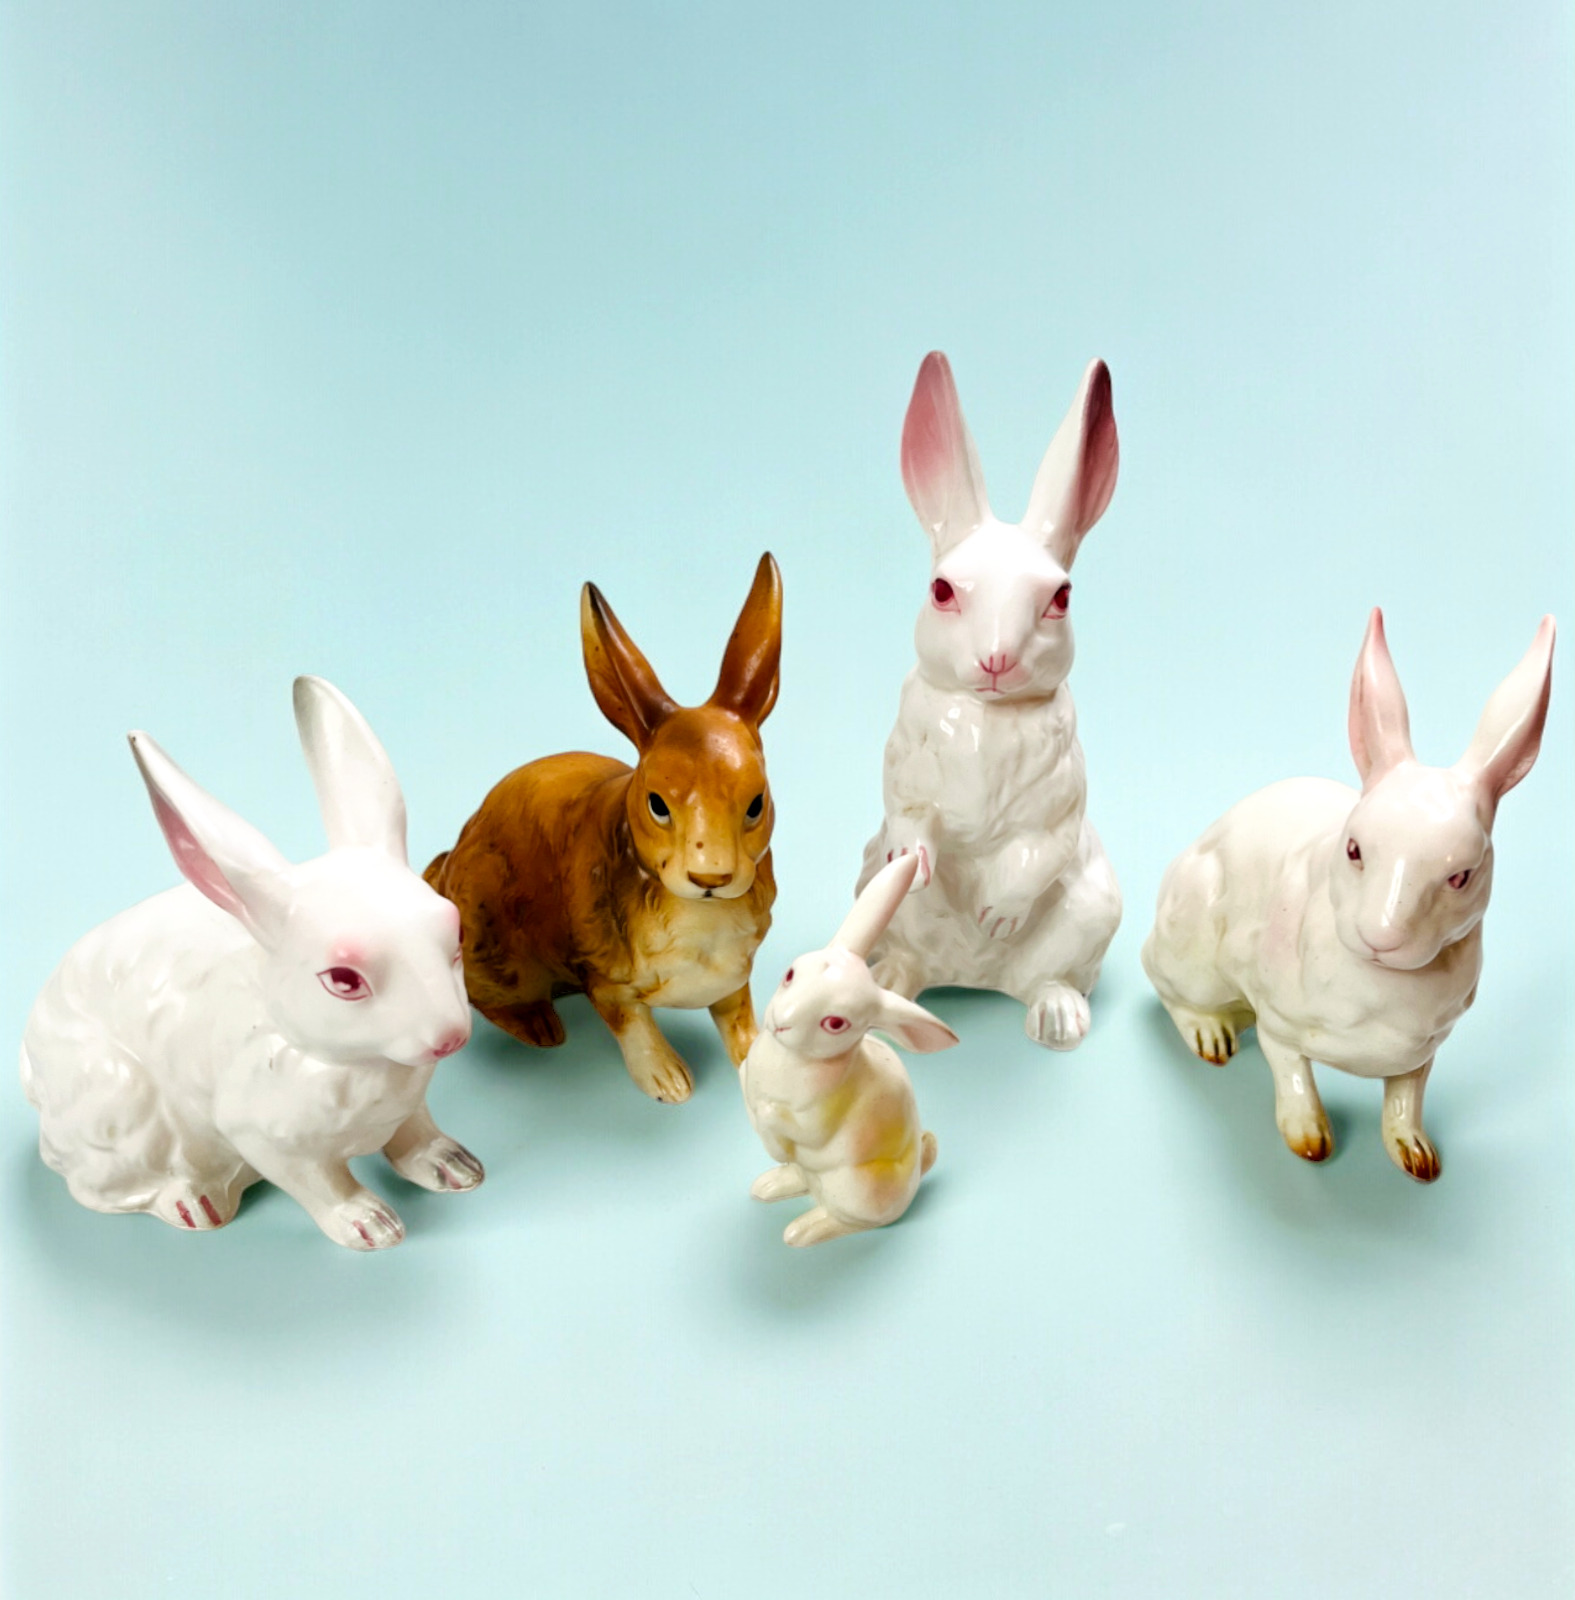 Lefton Easter Figurines Lot of 5 Bunny Rabbits A249 H6664 H880 Japan White Brown